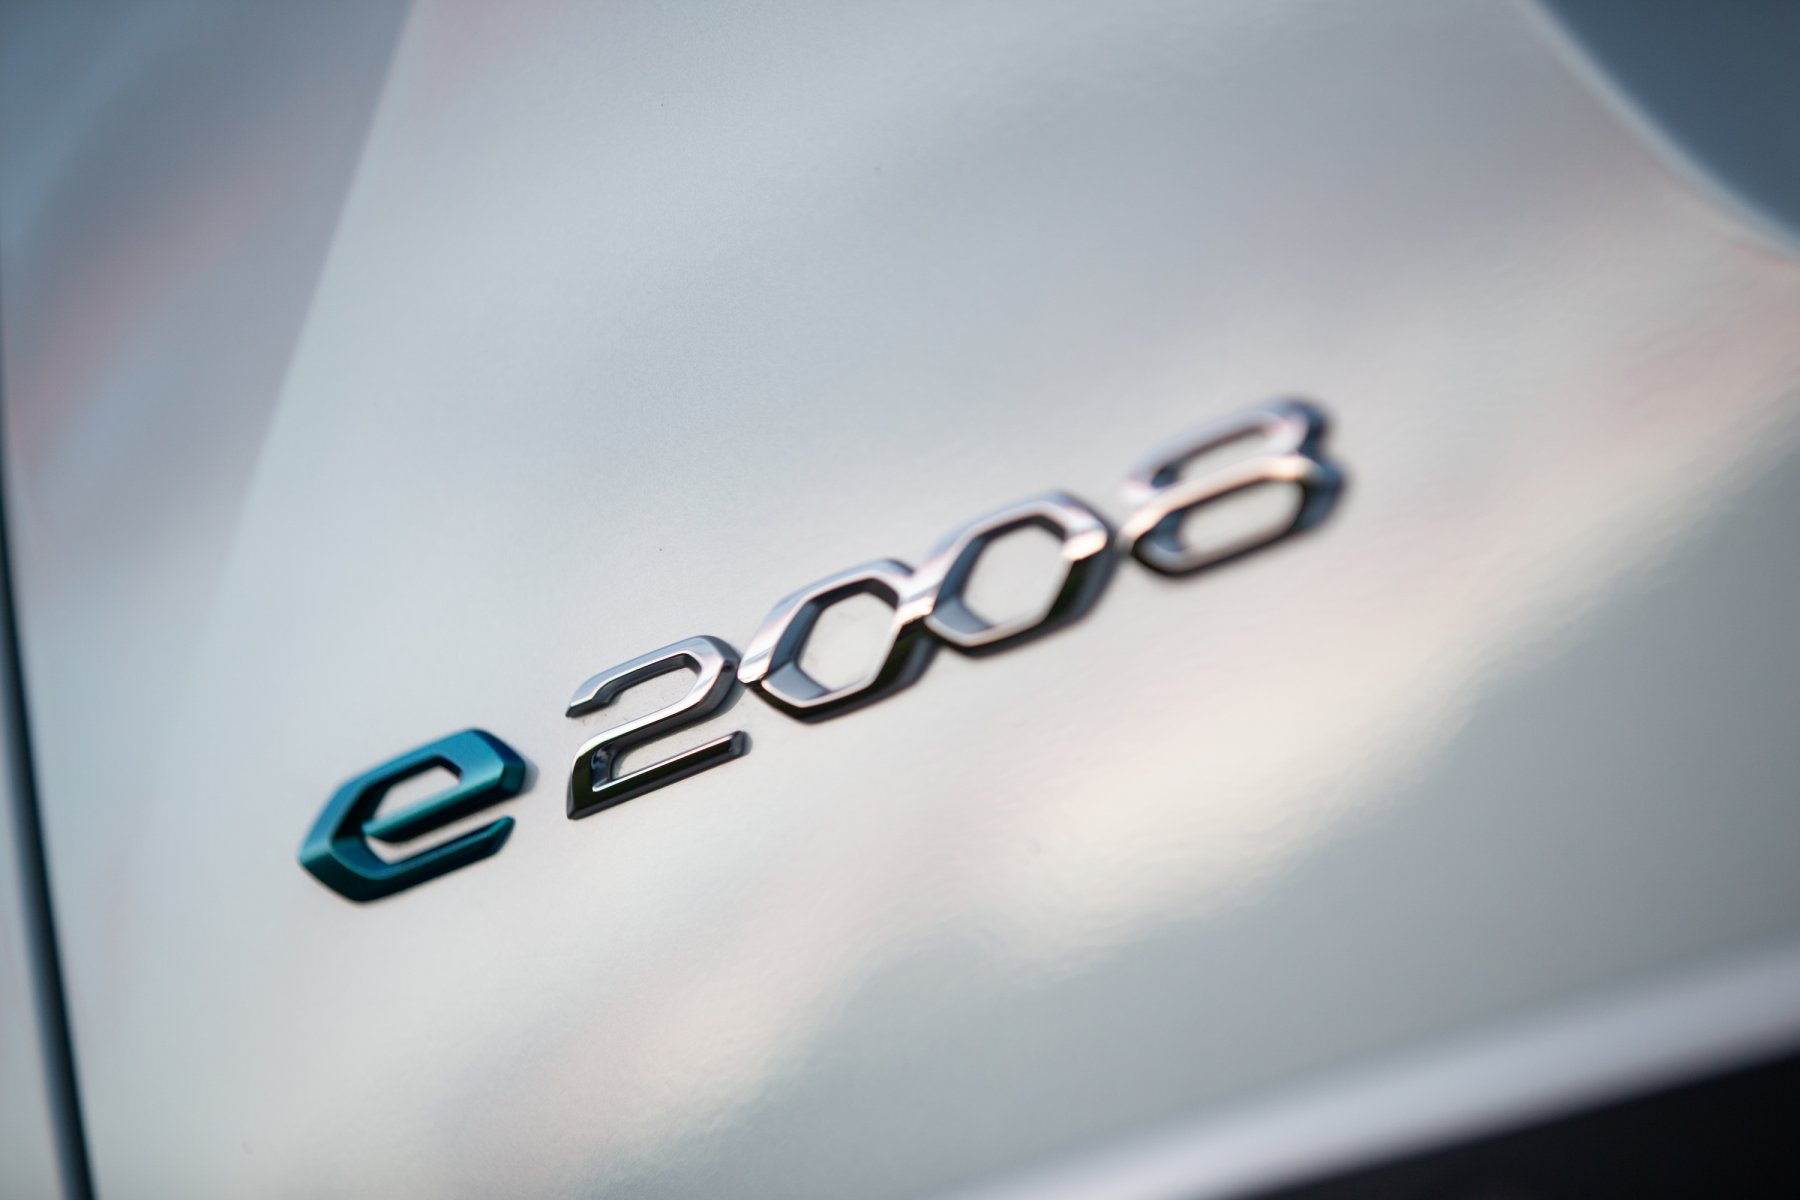 PEUGEOT e-2008 is due to join the Australian line up in Q3, 2023.